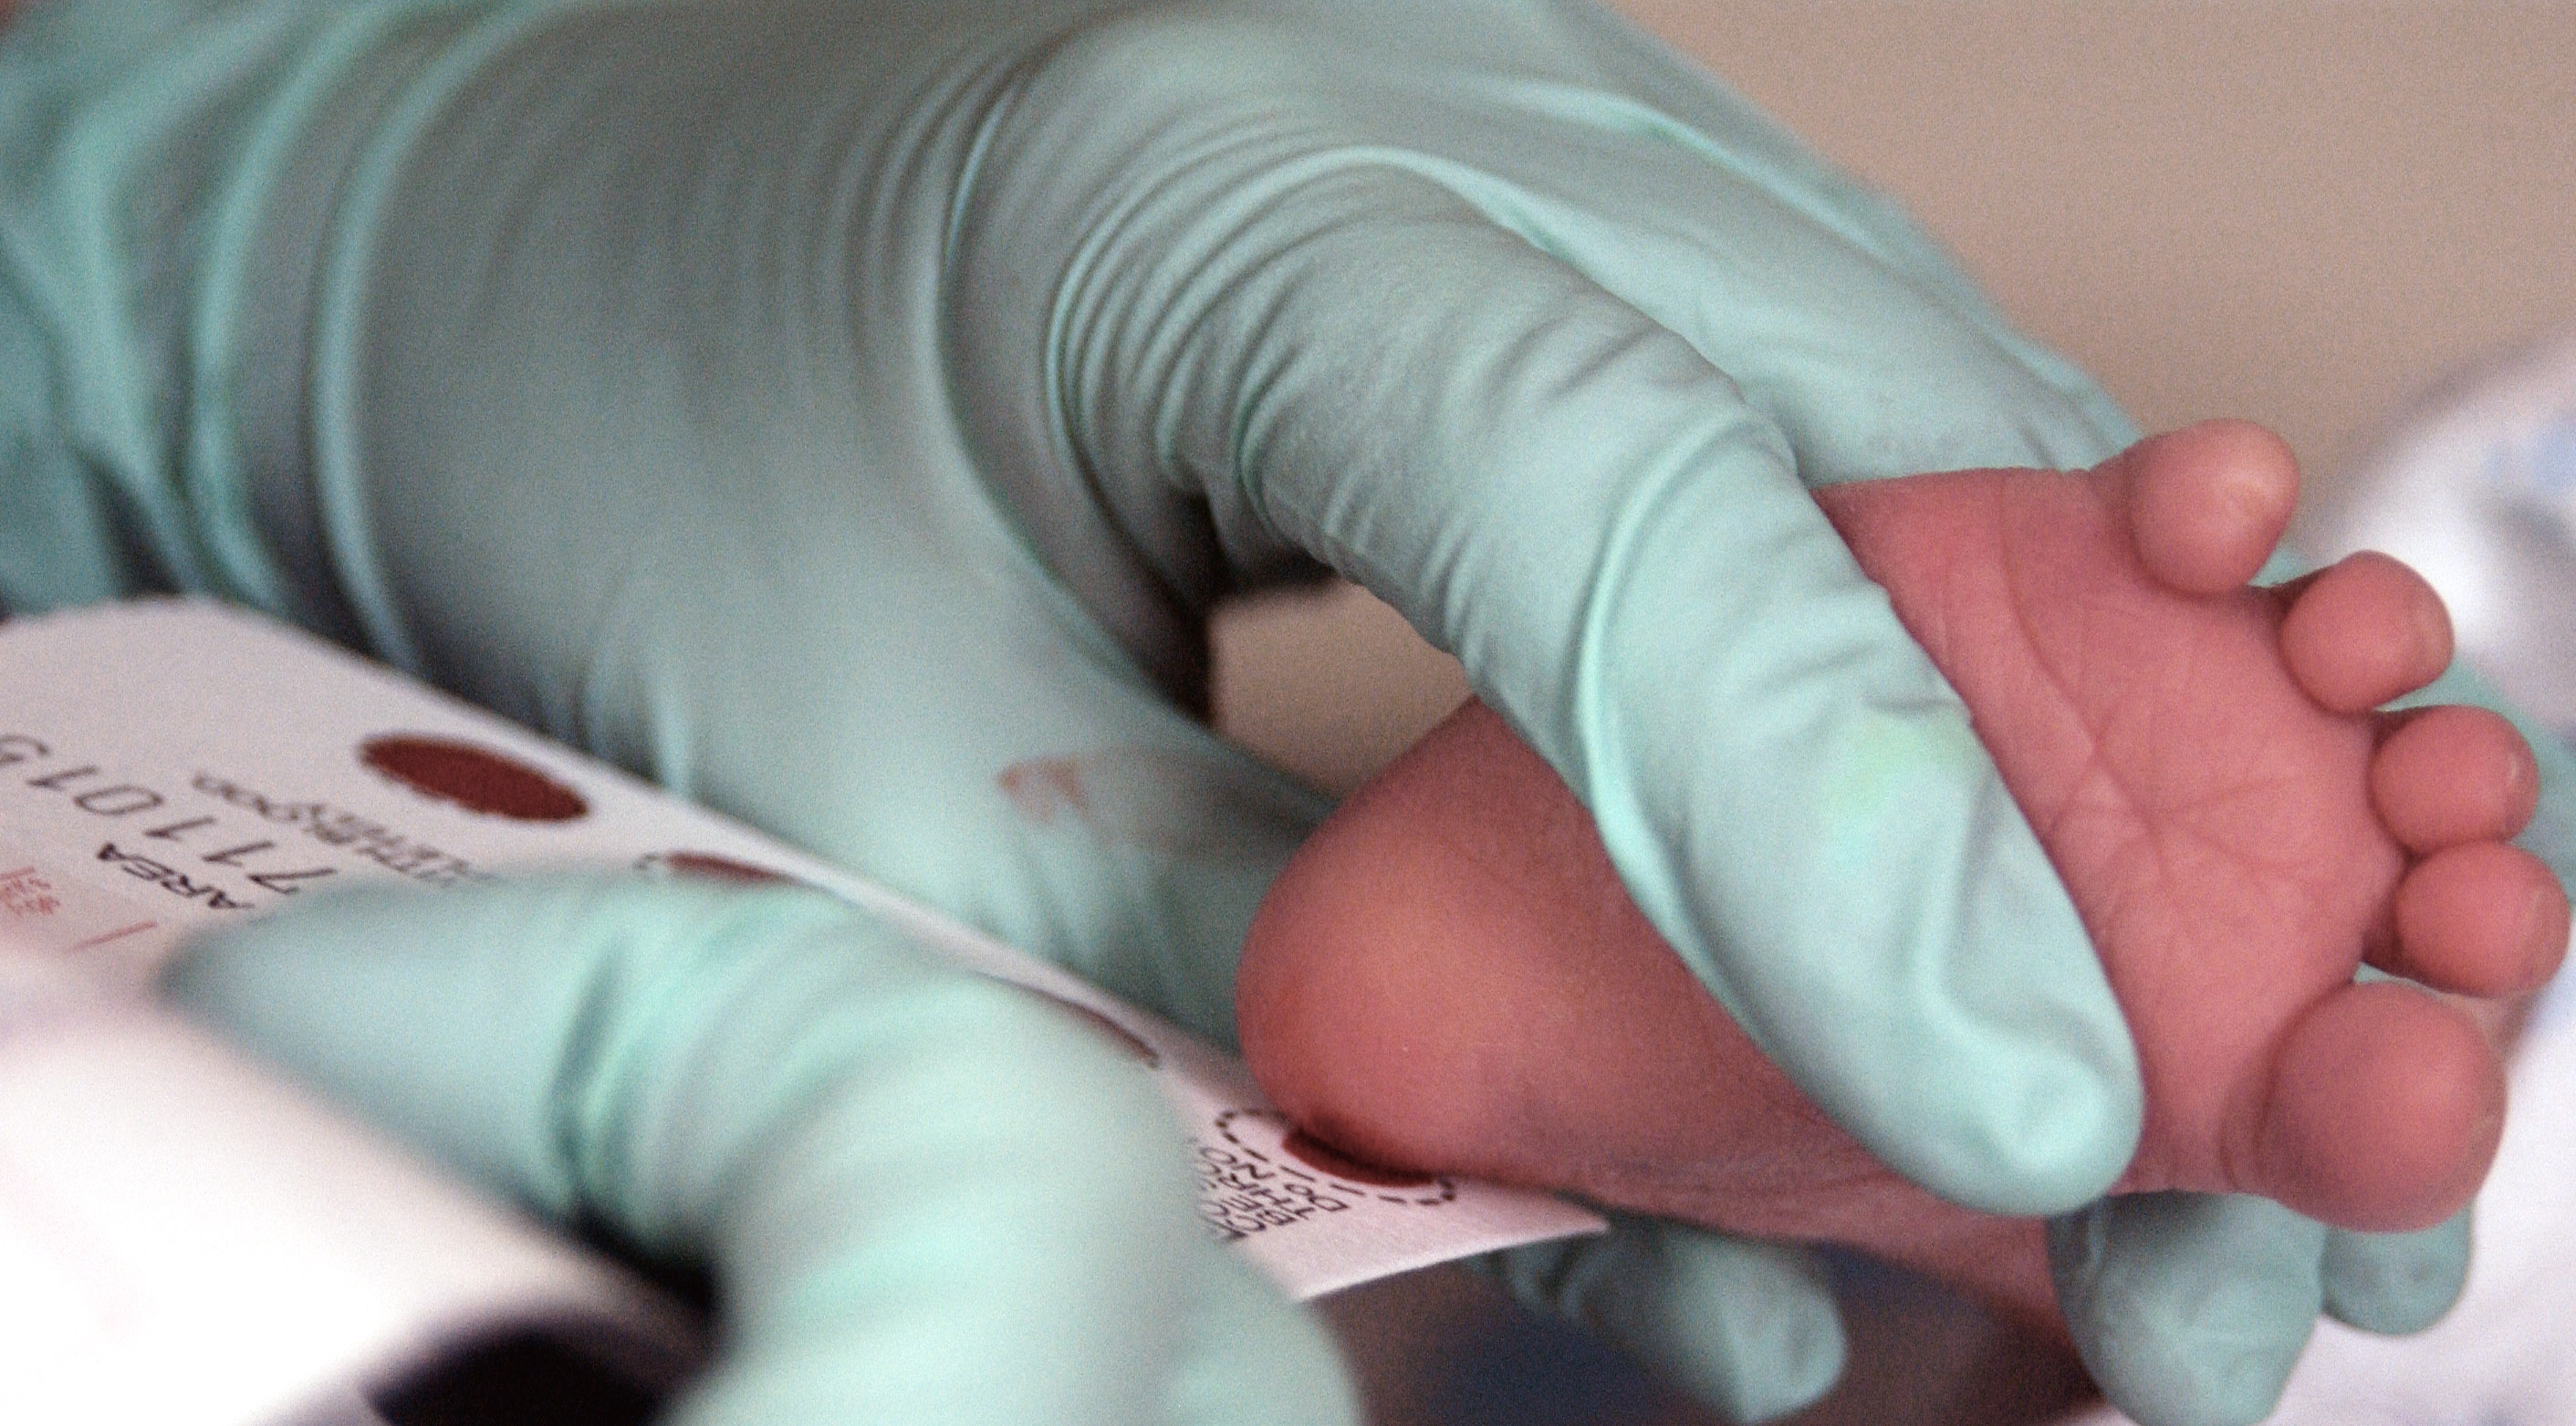 Newborn screening with blood obtained from heel prick